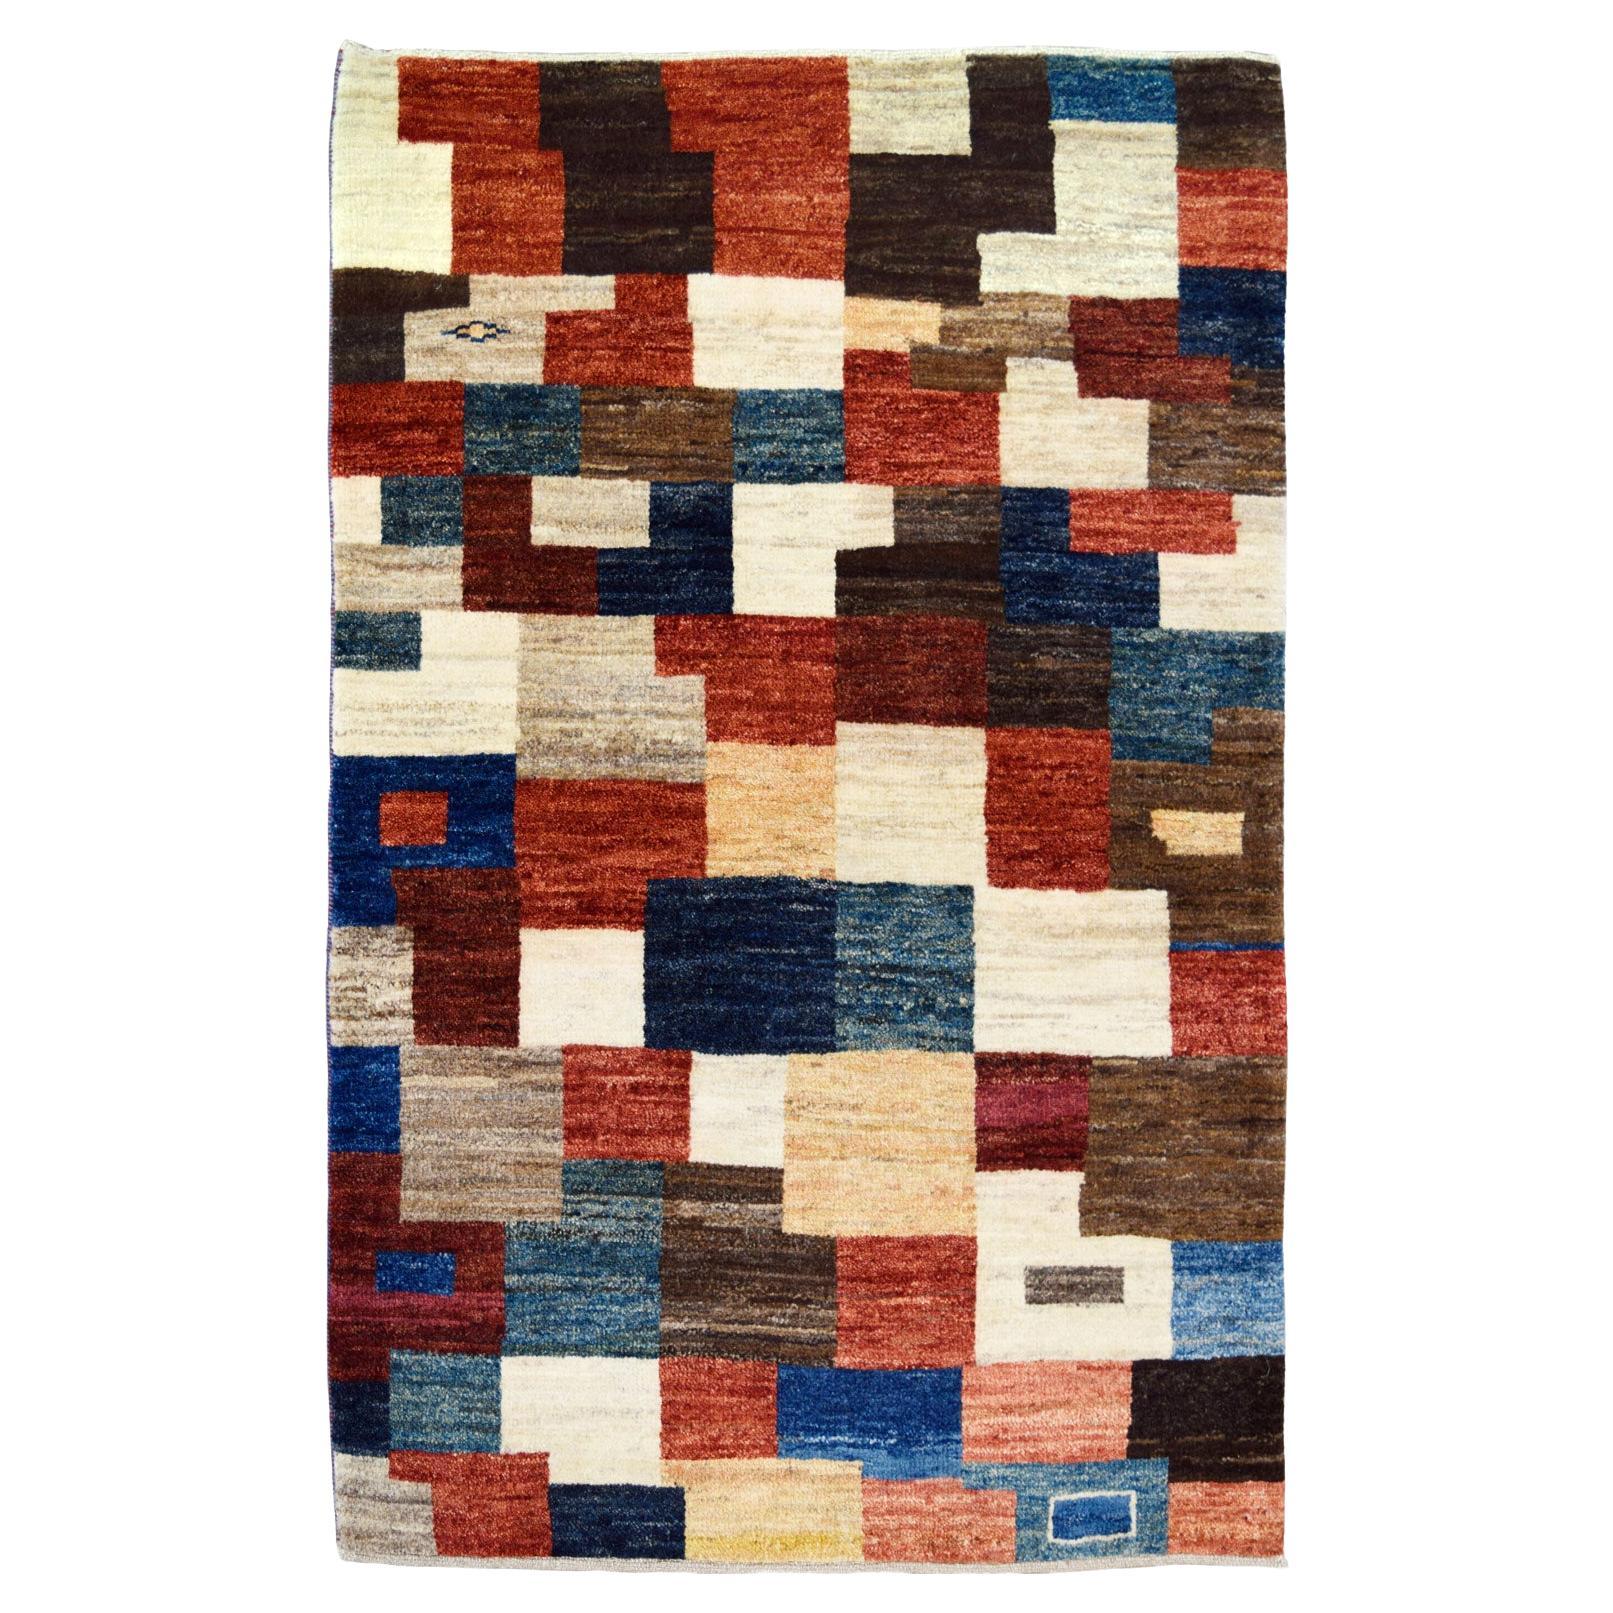 "The Village" Wool Persian Luri Gabbeh Tribal Rug, Blue, Red, Taupe, 3' x 4' For Sale